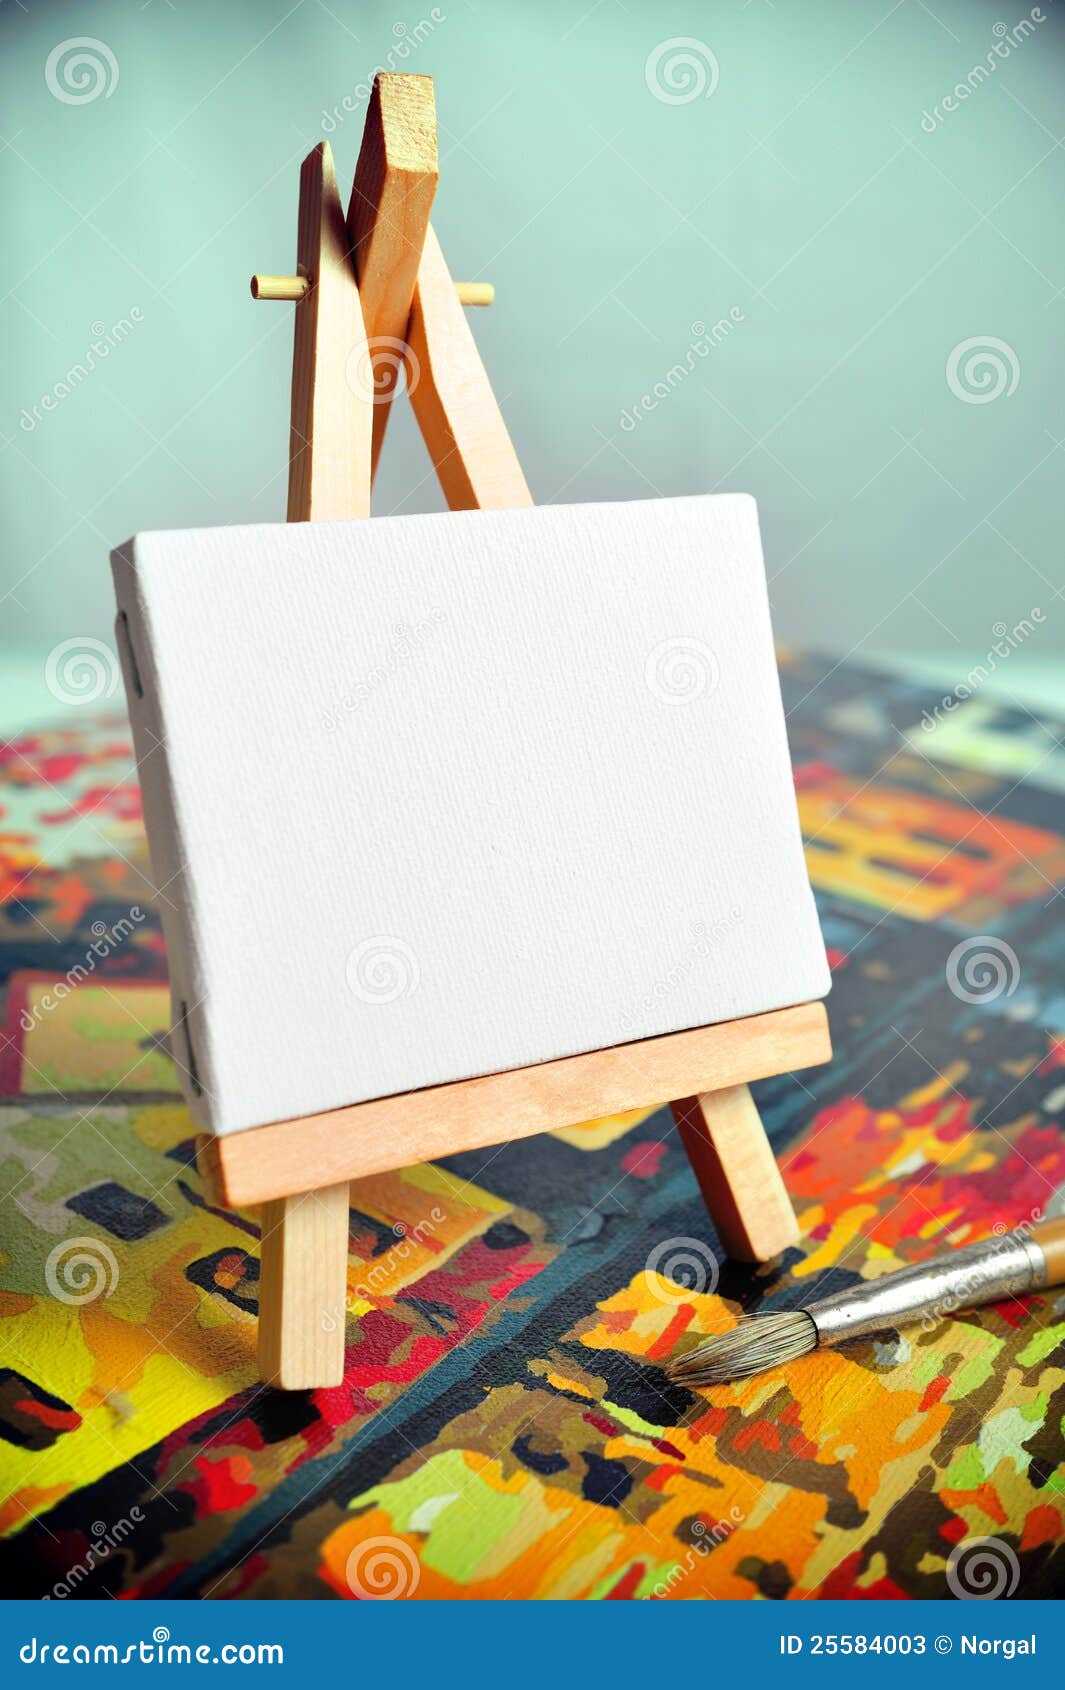 Mini Painting On An Easel On A Light Background At An Angle Stock Photo -  Download Image Now - iStock